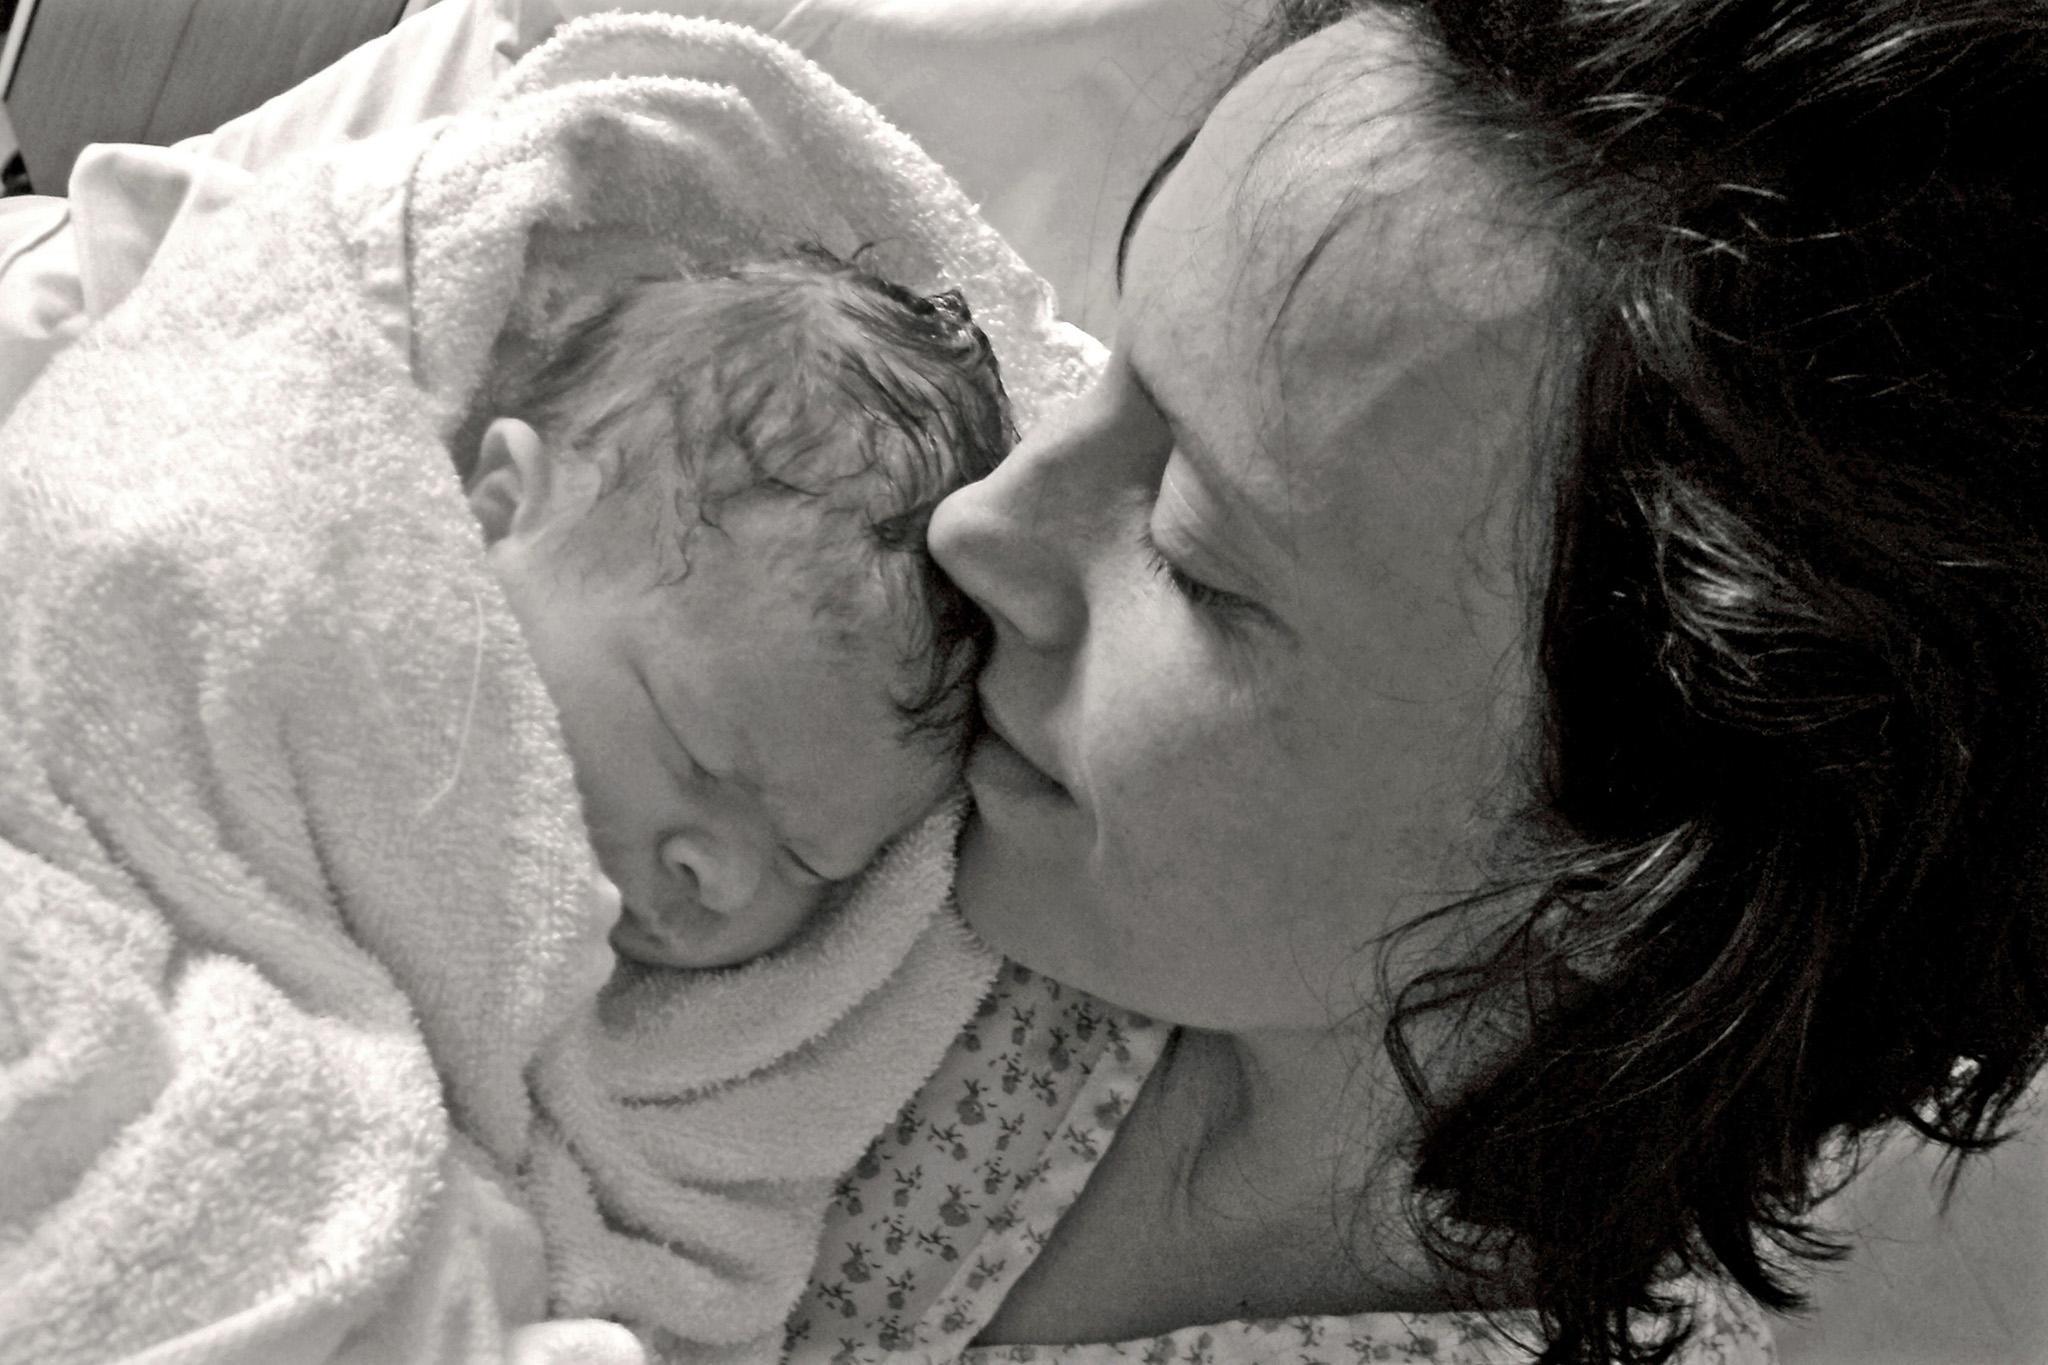 Baby Kate Stanton-Davies with her mother Rhiannon Davies in 2009. Her death helped expose poor care at Shrewsbury and Telford Hospital Trust